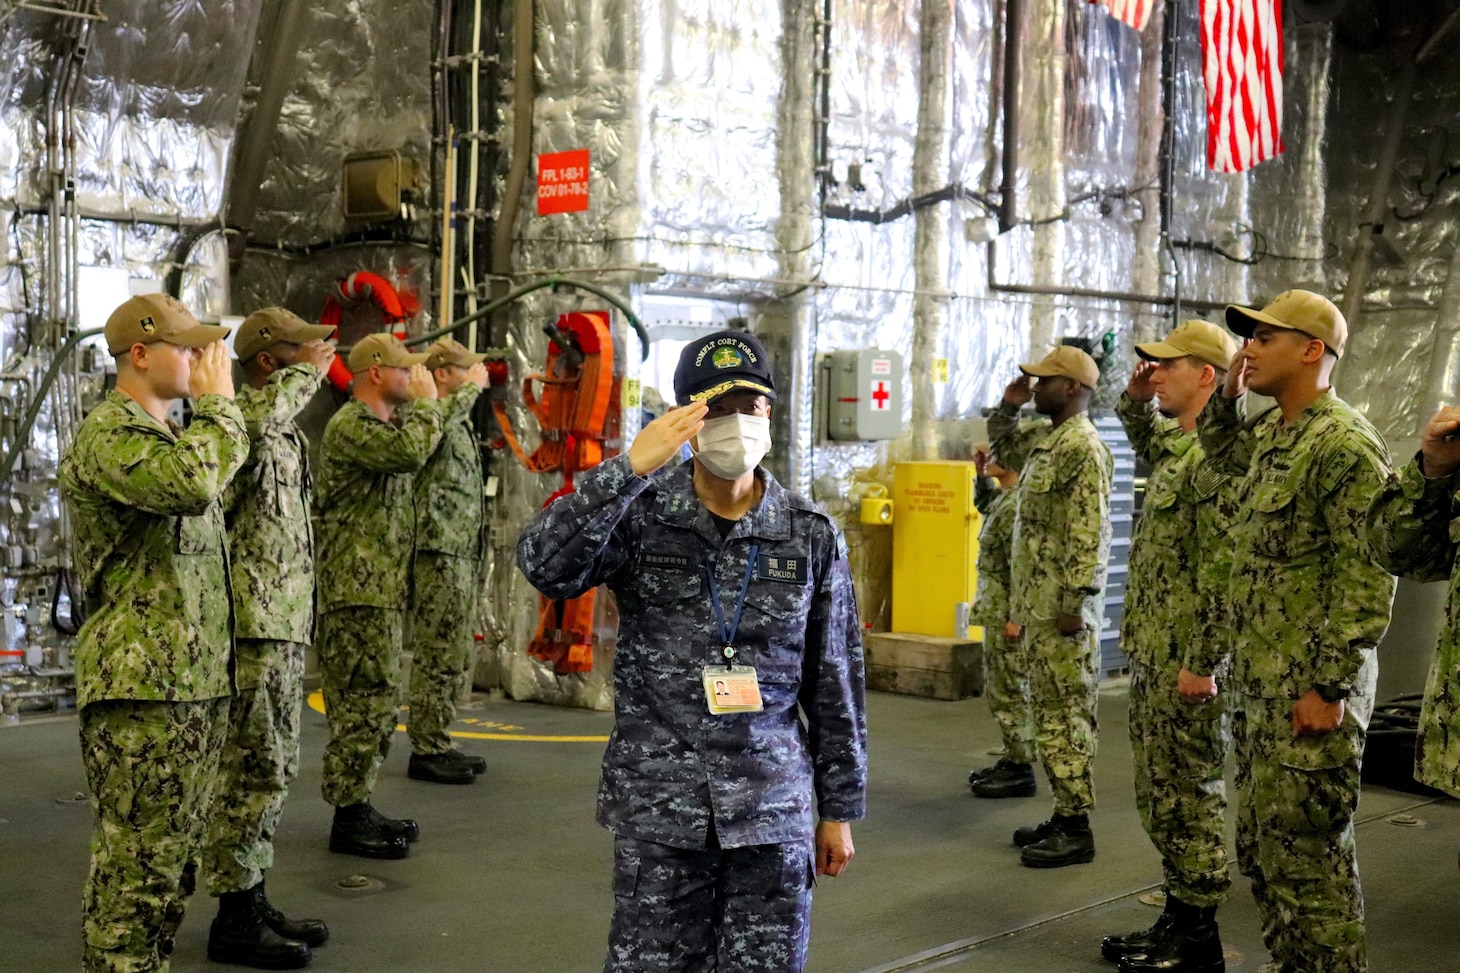 SASEBO, Japan (June 1, 2022) Japan Maritime Self-Defense Force Vice Adm. FUKUDA Tatsuya, commander, Fleet Escort Force, arrives aboard the Independence-class littoral combat ship USS Charleston (LCS 18). Charleston, part of Destroyer Squadron (DESRON) 7, is on a rotational deployment, operating in the U.S. 7th Fleet area of operations to enhance interoperability with partners and serve as a ready-response force in support of a free and open Indo-Pacific region. (U.S. Navy photo by Lt. j.g. James French)